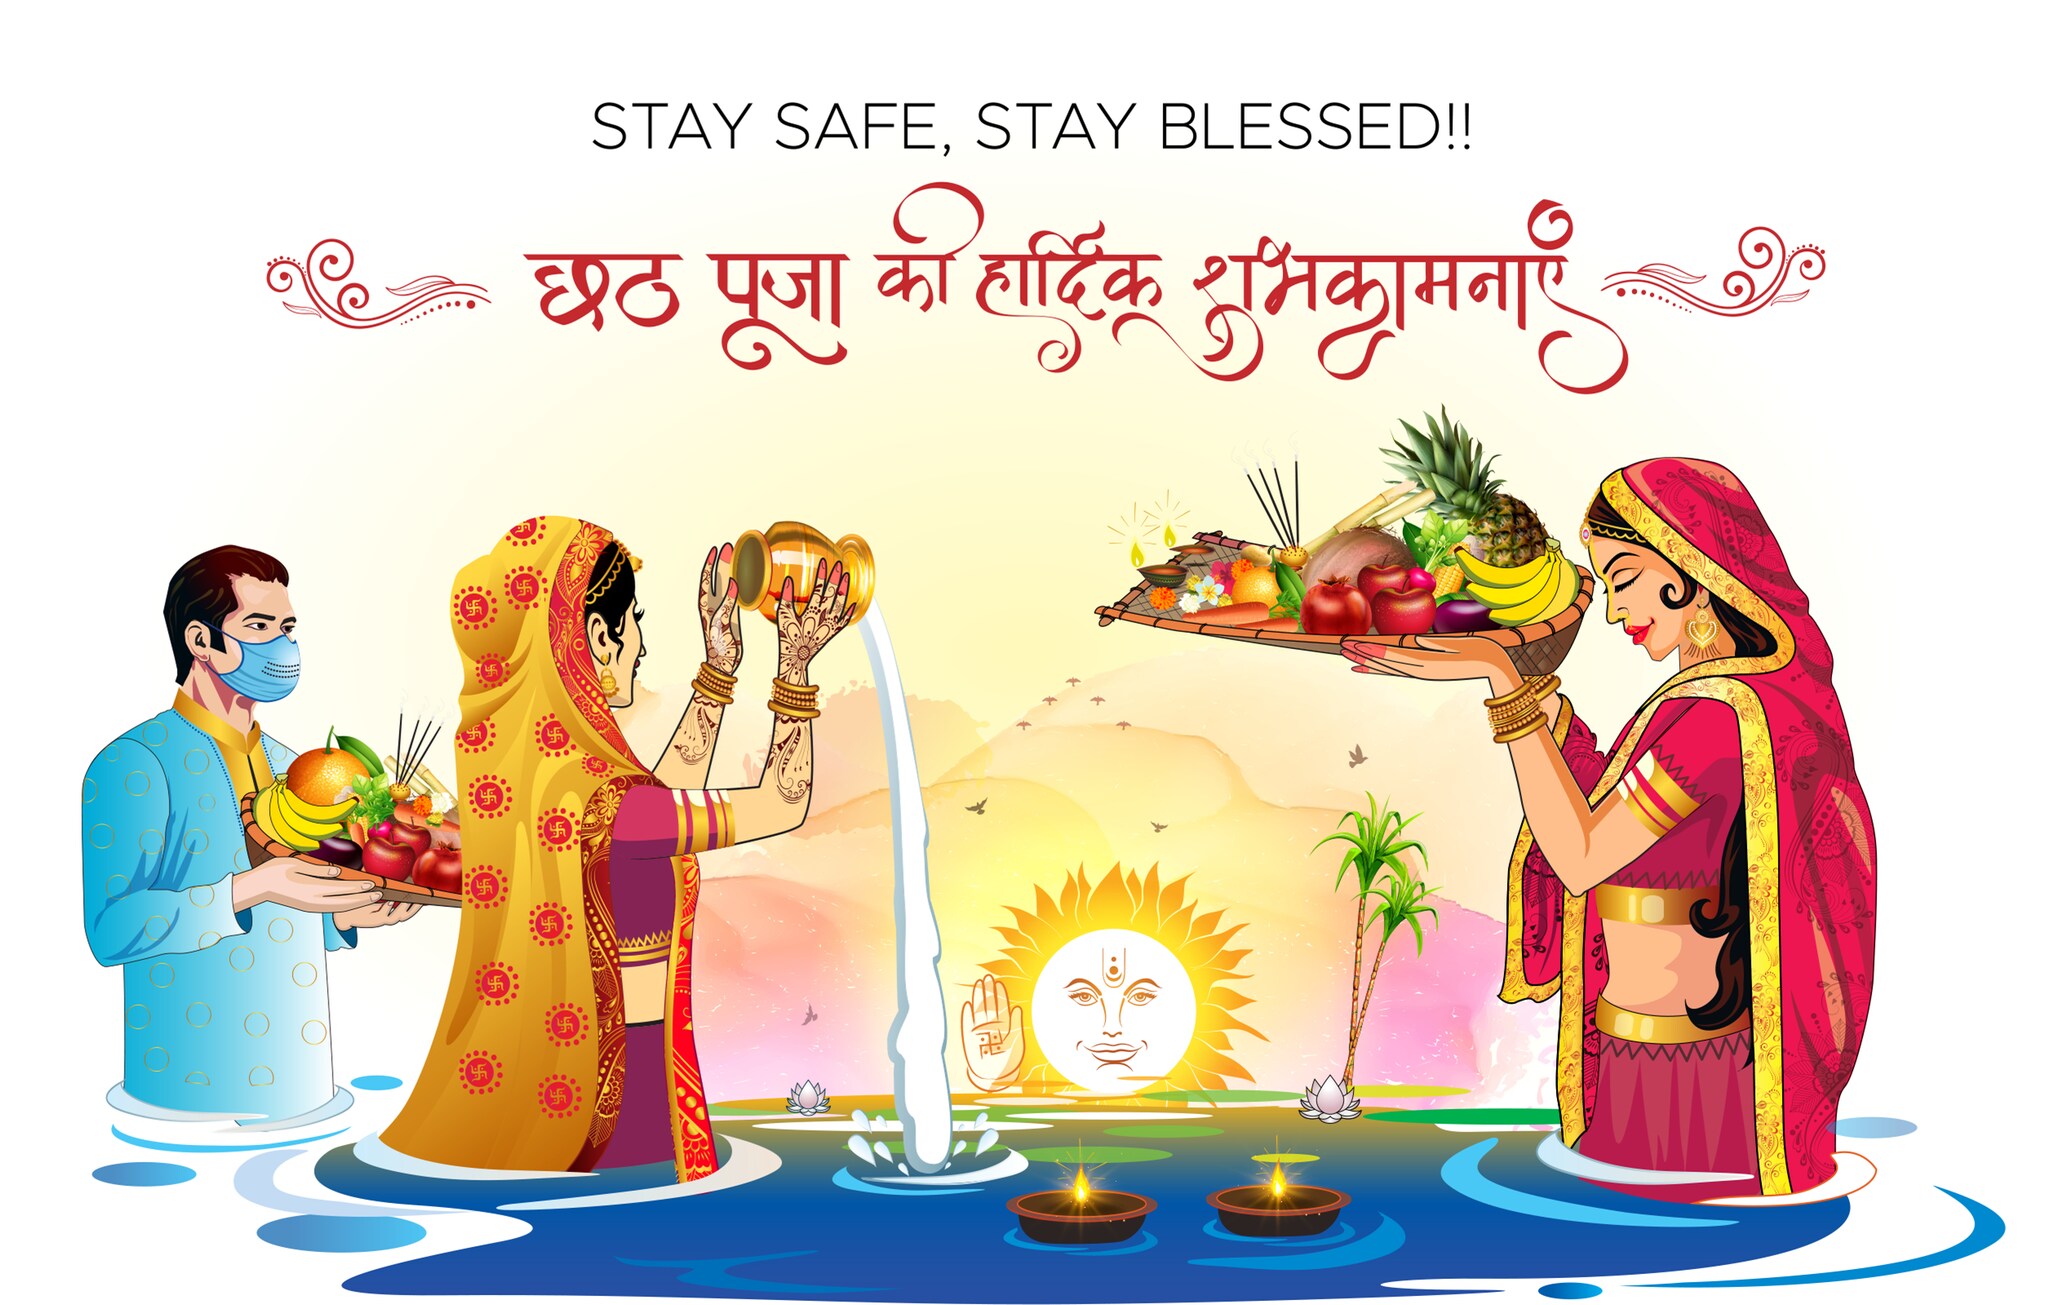 Happy Chhath Puja 2021 Images Wishes Quotes Messages And Whatsapp Greetings To Share With 1742